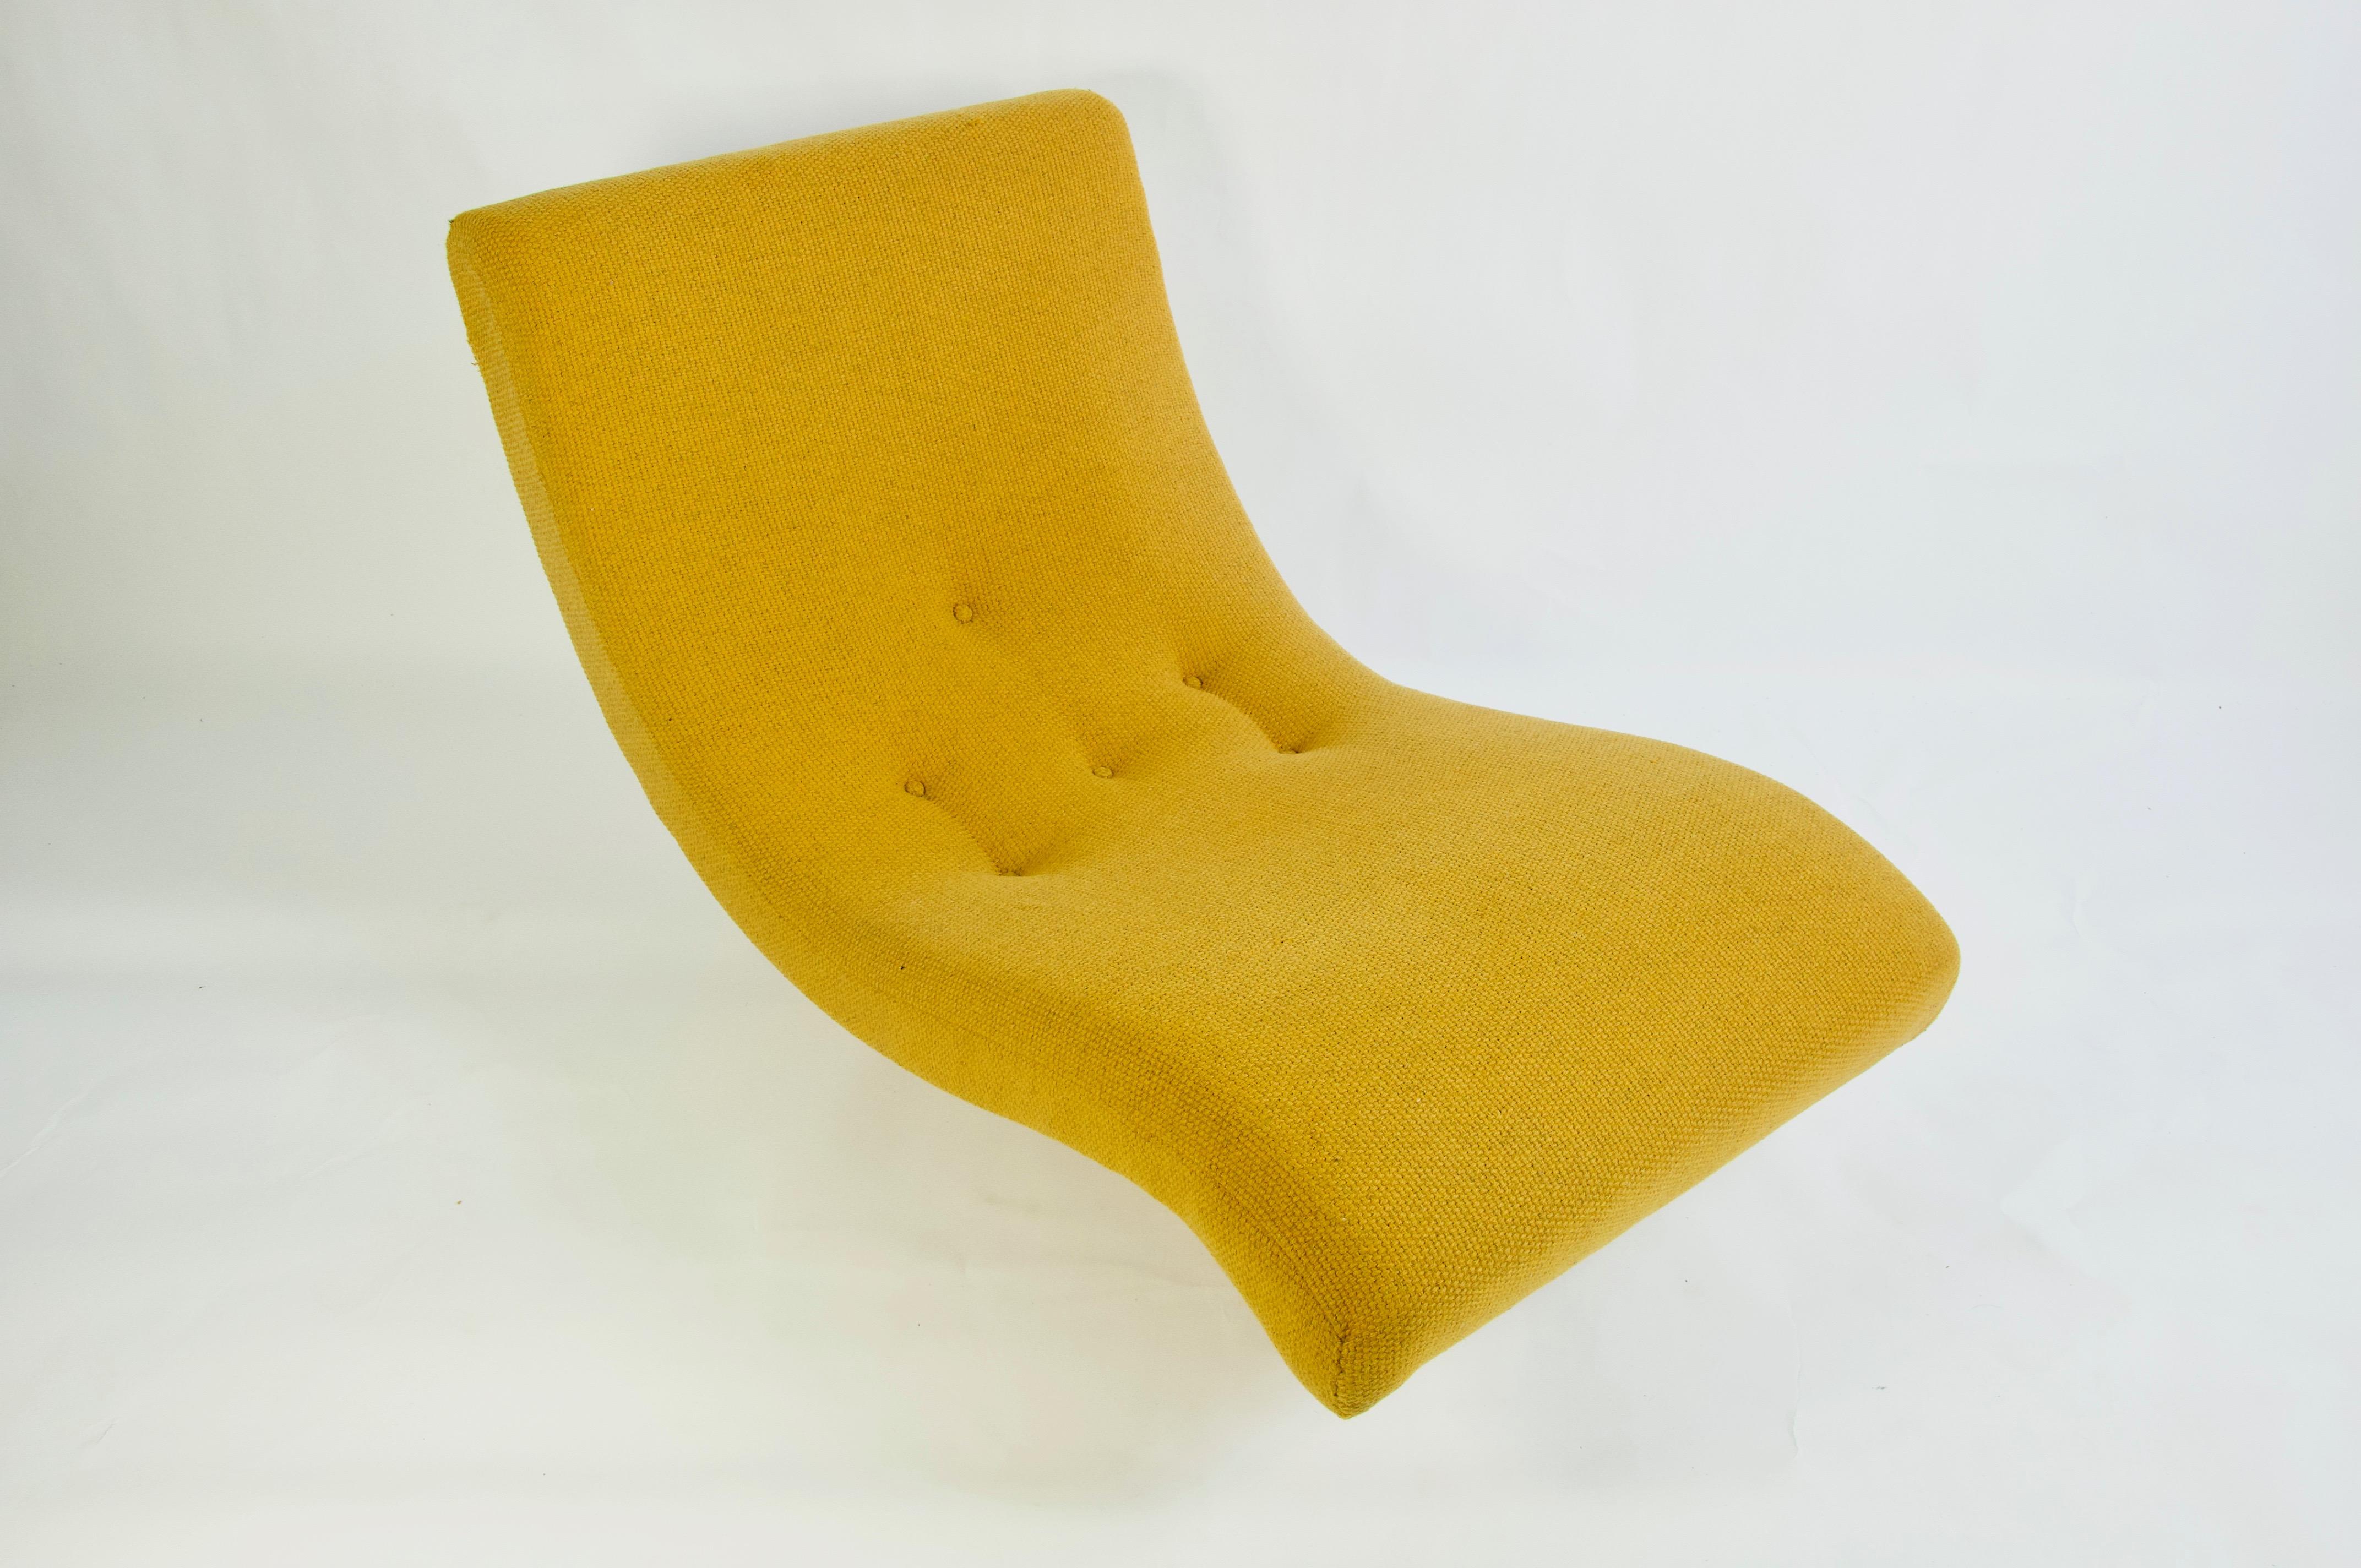 Adrian Pearsall for Craft Associates Chaise Lounge im Zustand „Gut“ im Angebot in Turners Falls, MA